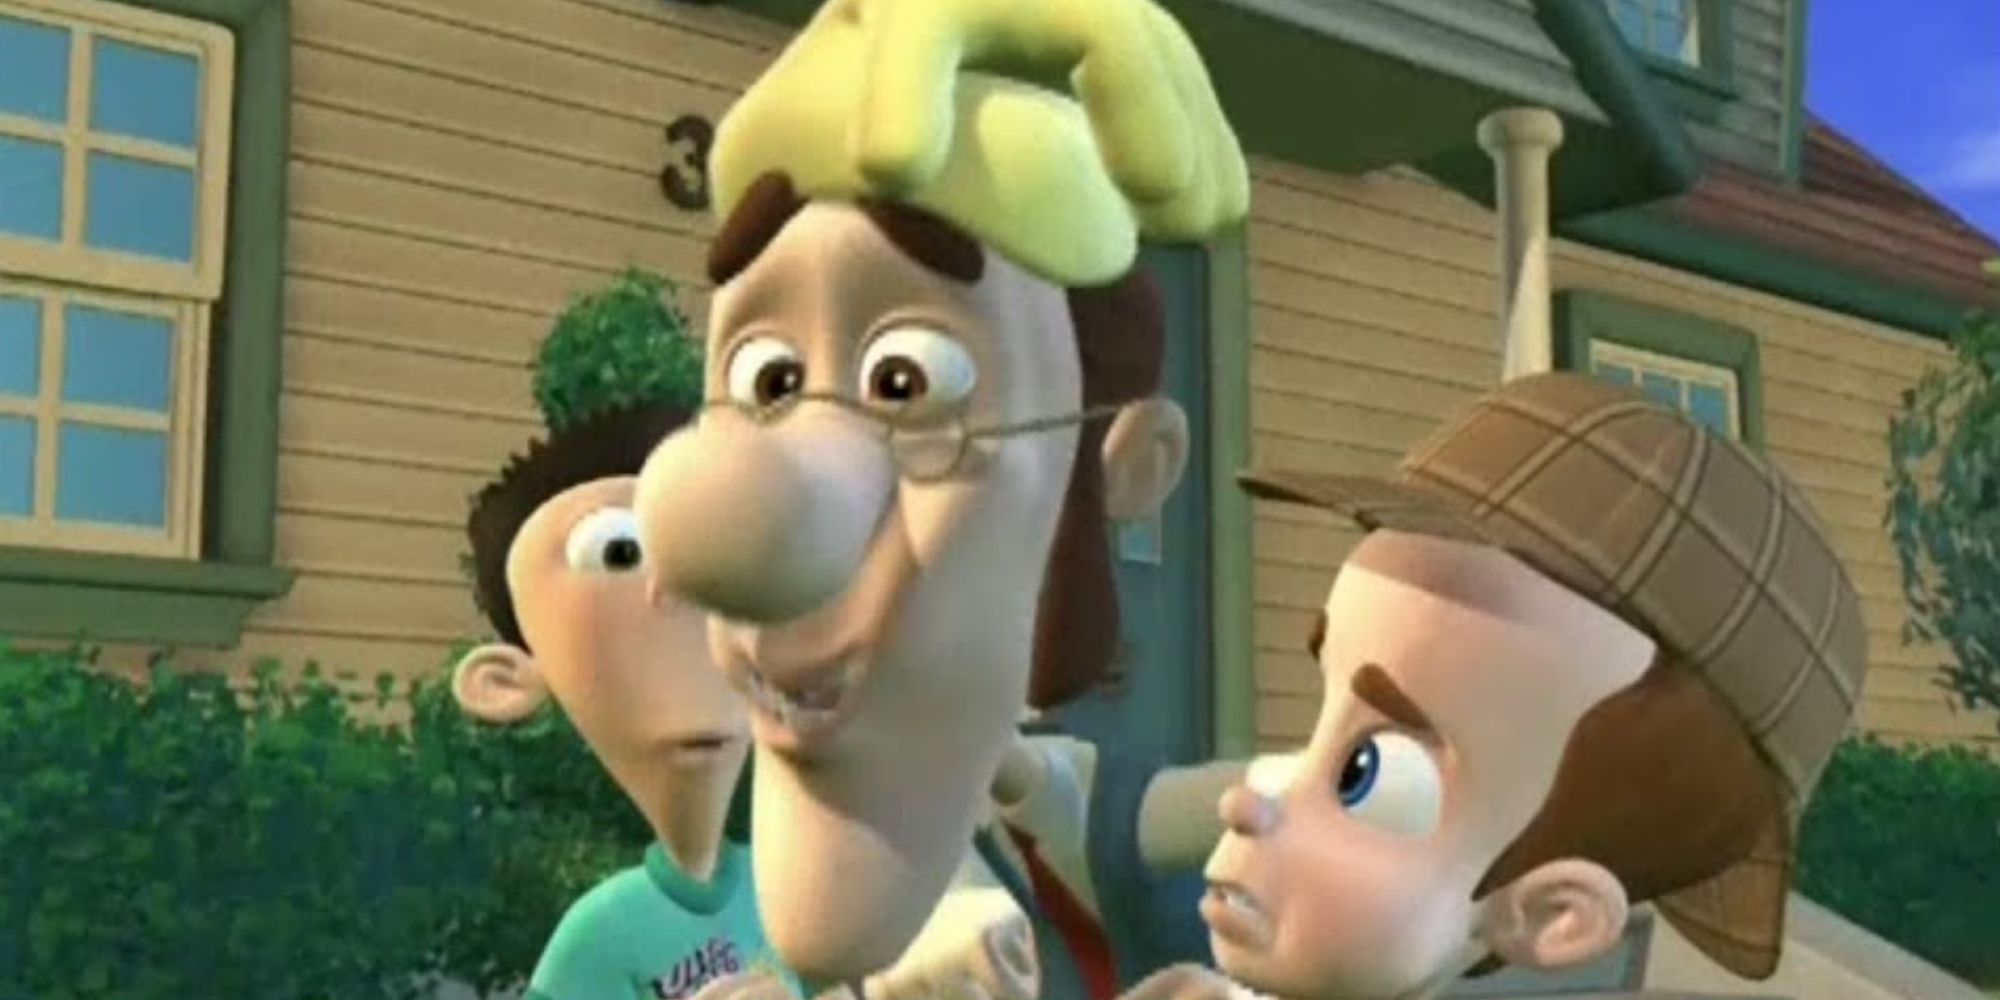 Hugh-Neutron from Jimmy Neutron wearing a glove on his head while Jimmy and Sheen surround him with concern